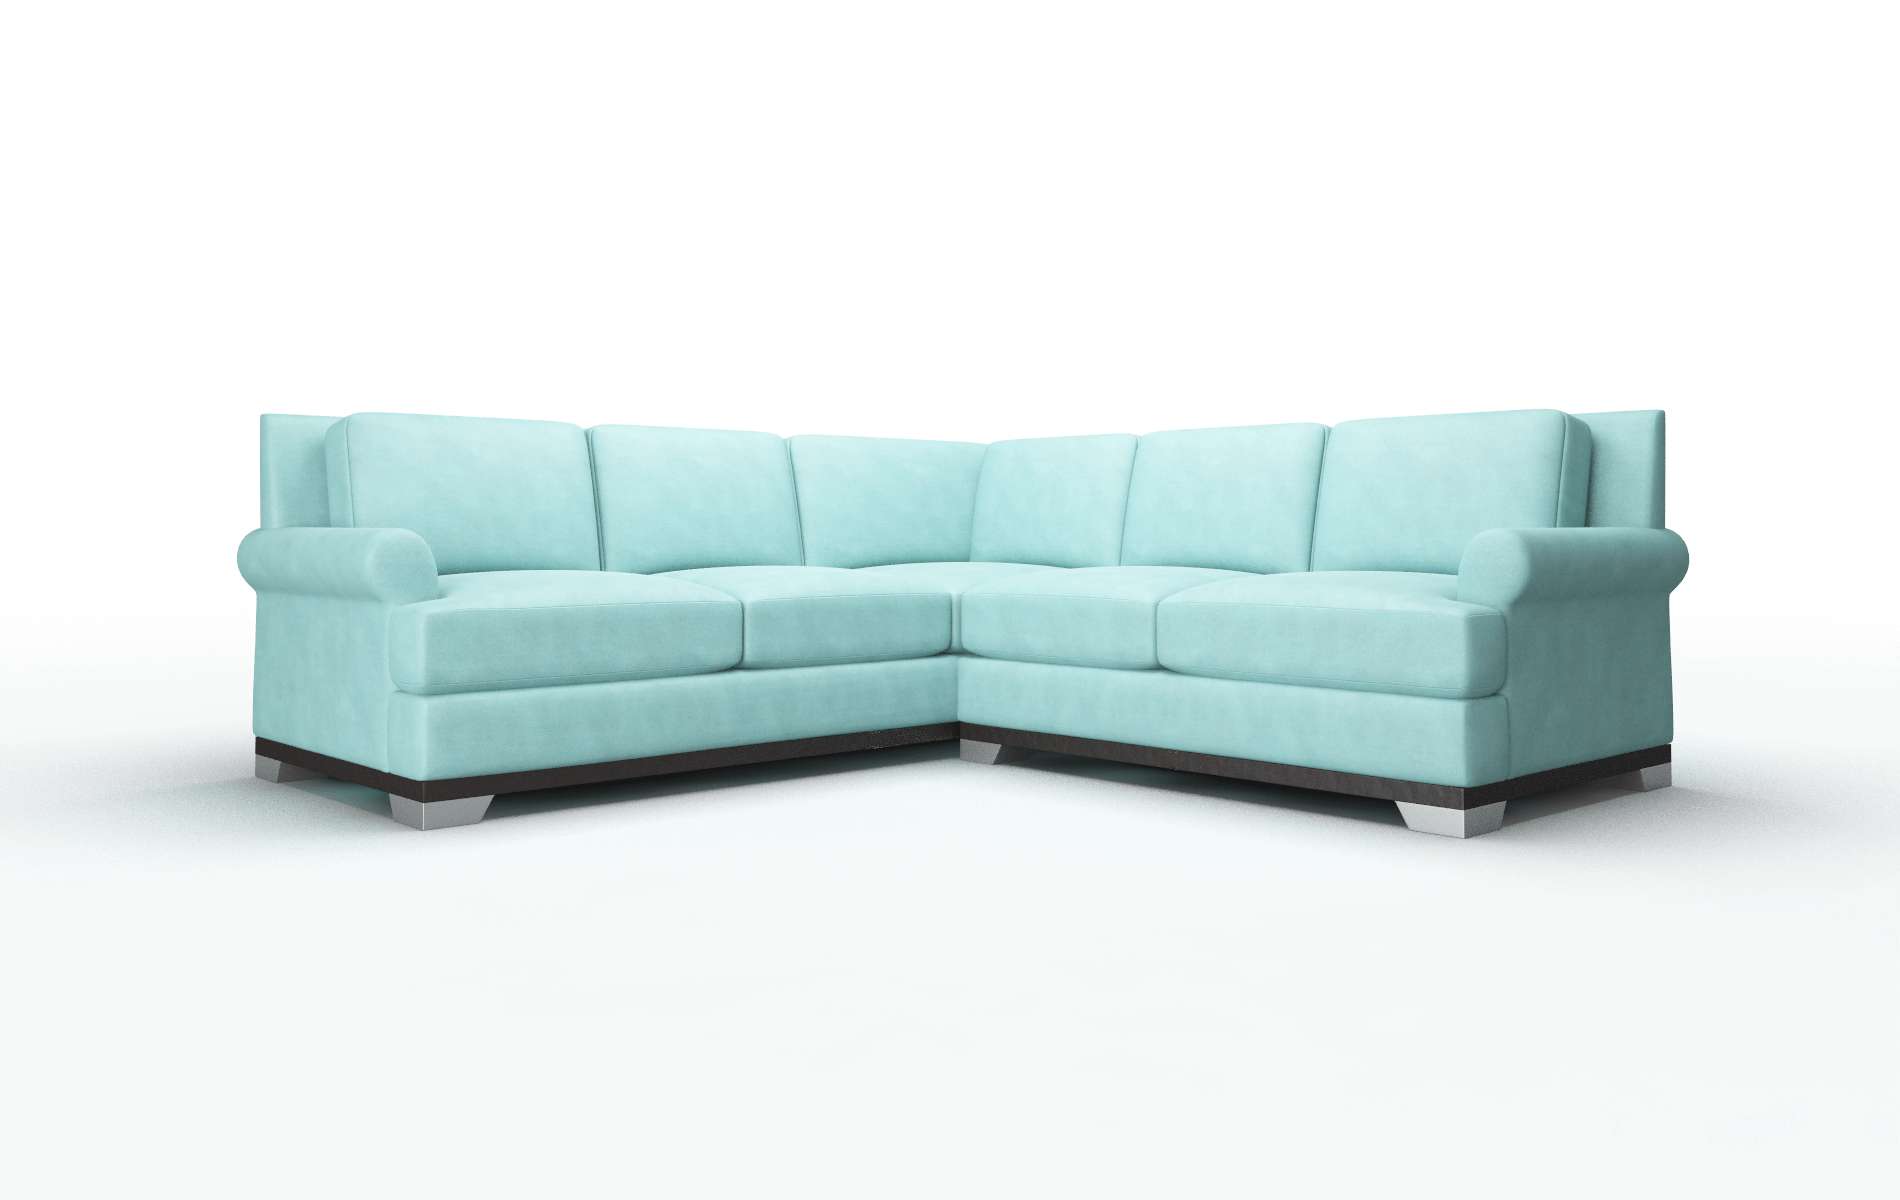 Newyork Curious Turquoise Sectional espresso legs 1